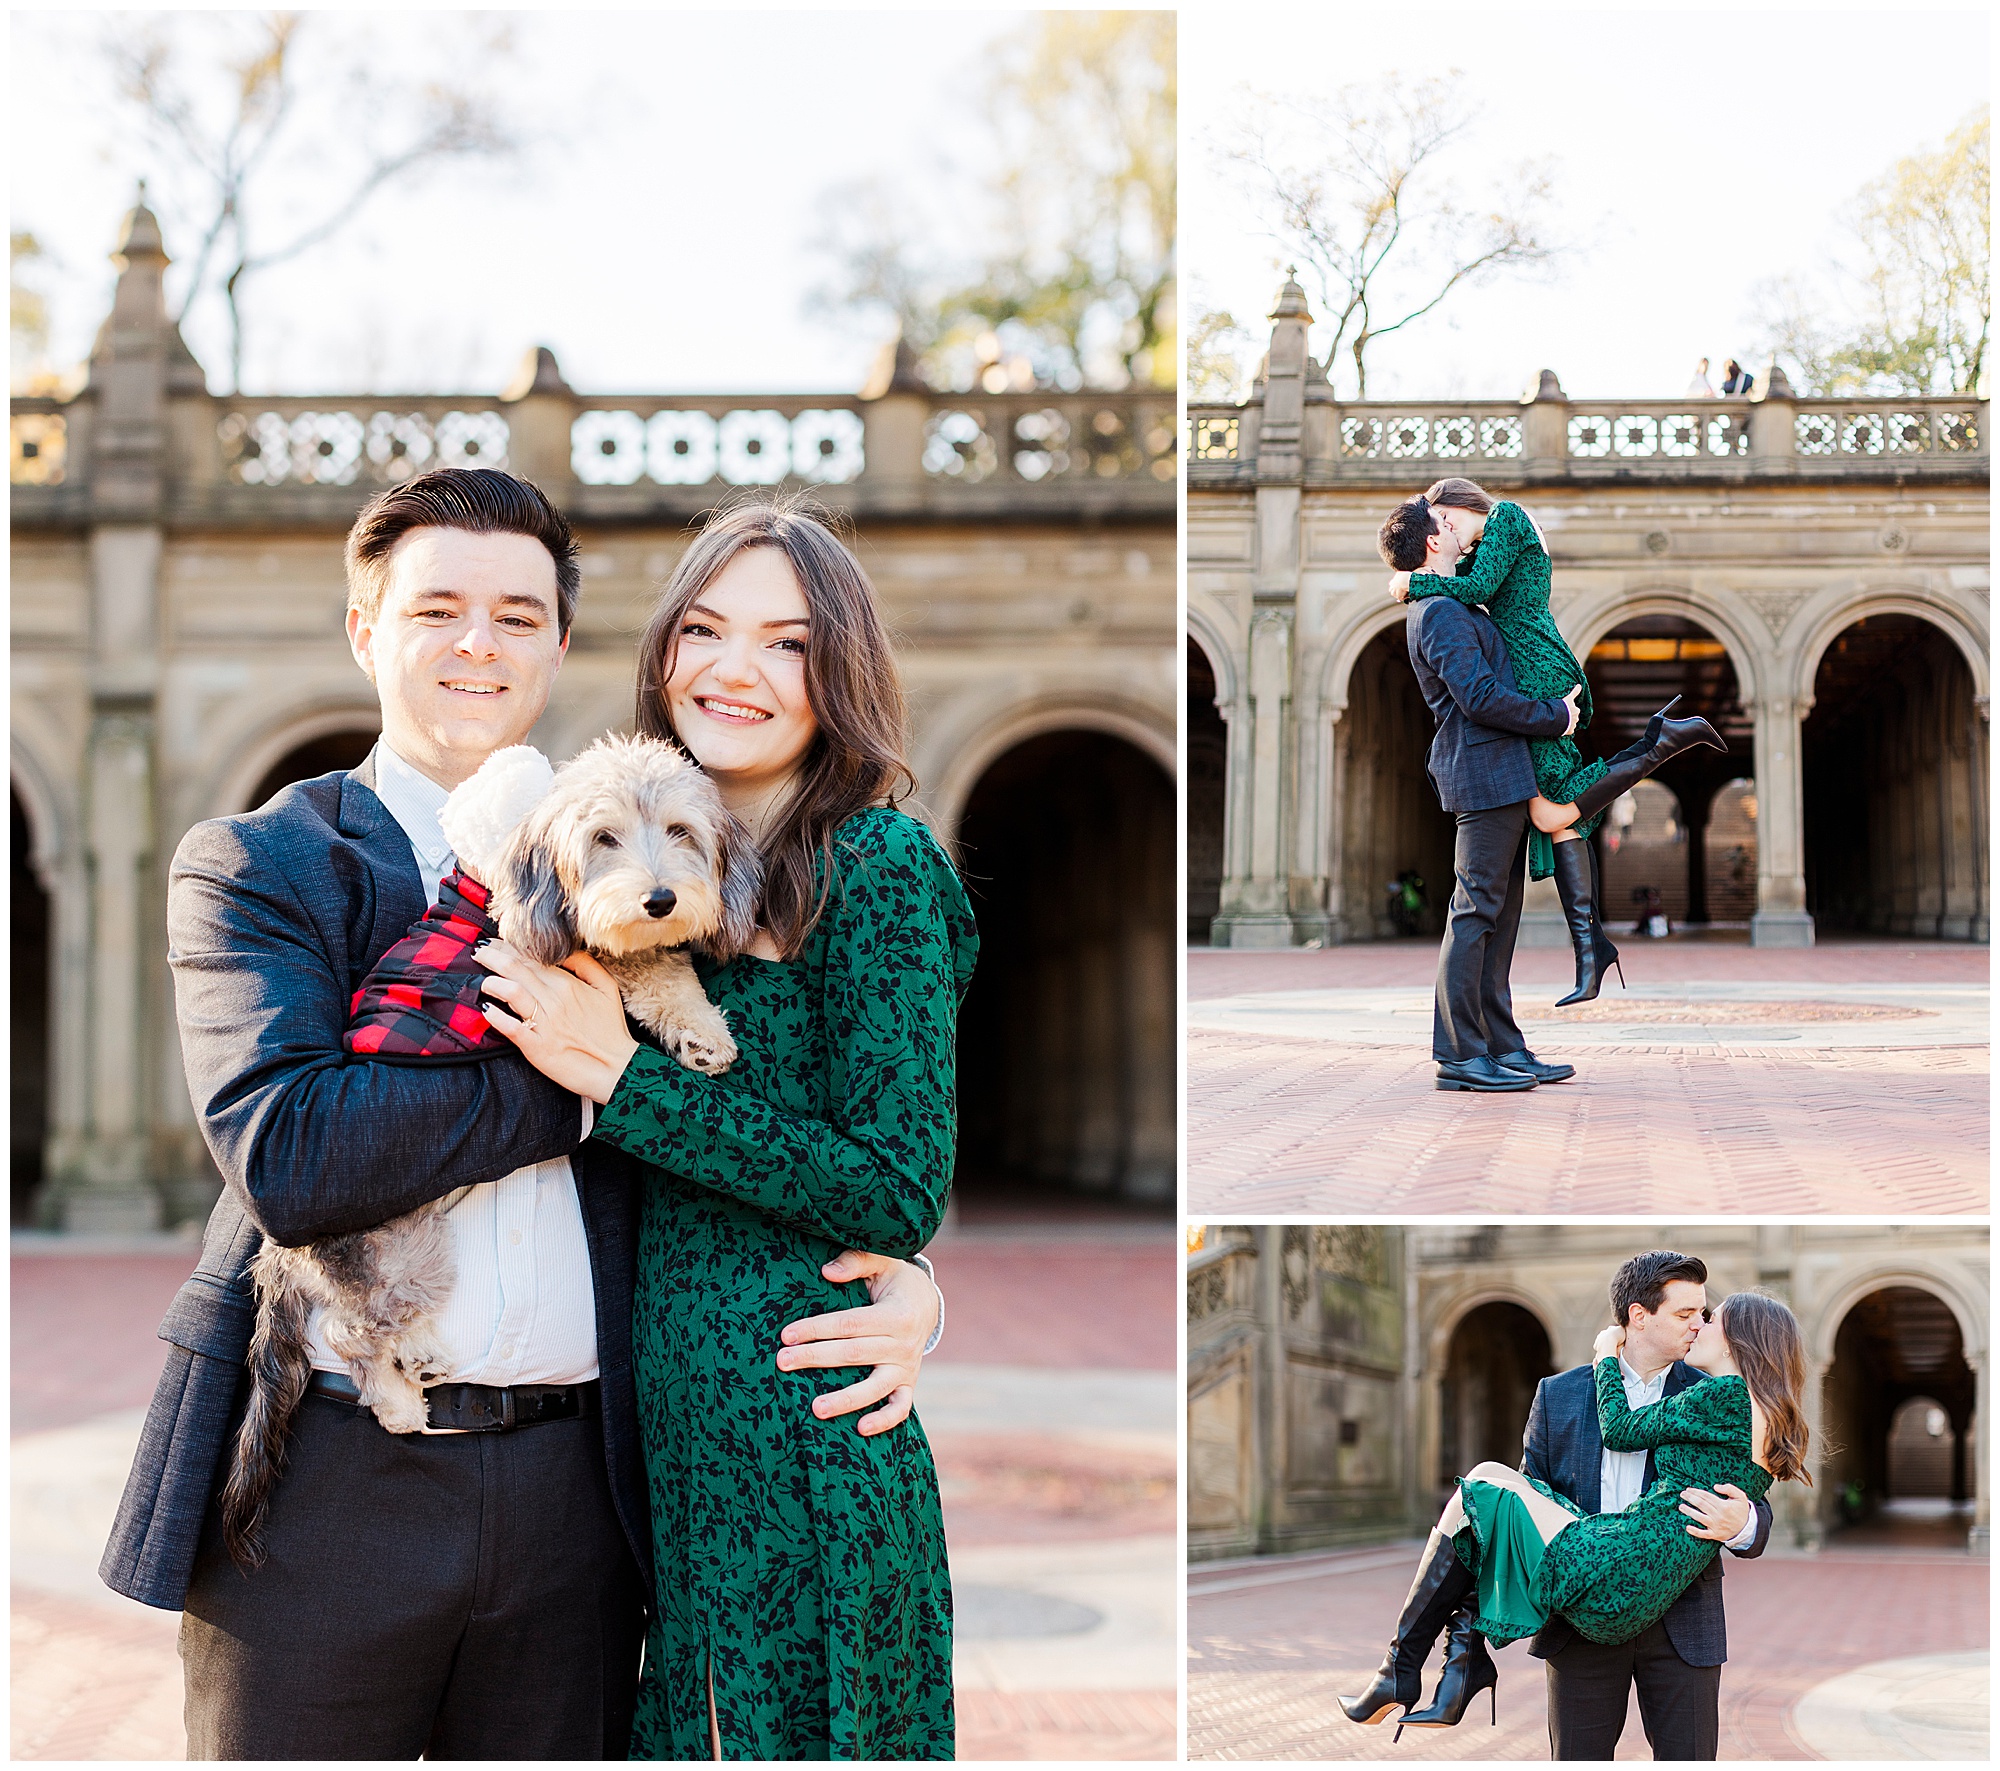 Charming Engagement Photoshoot in Central Park